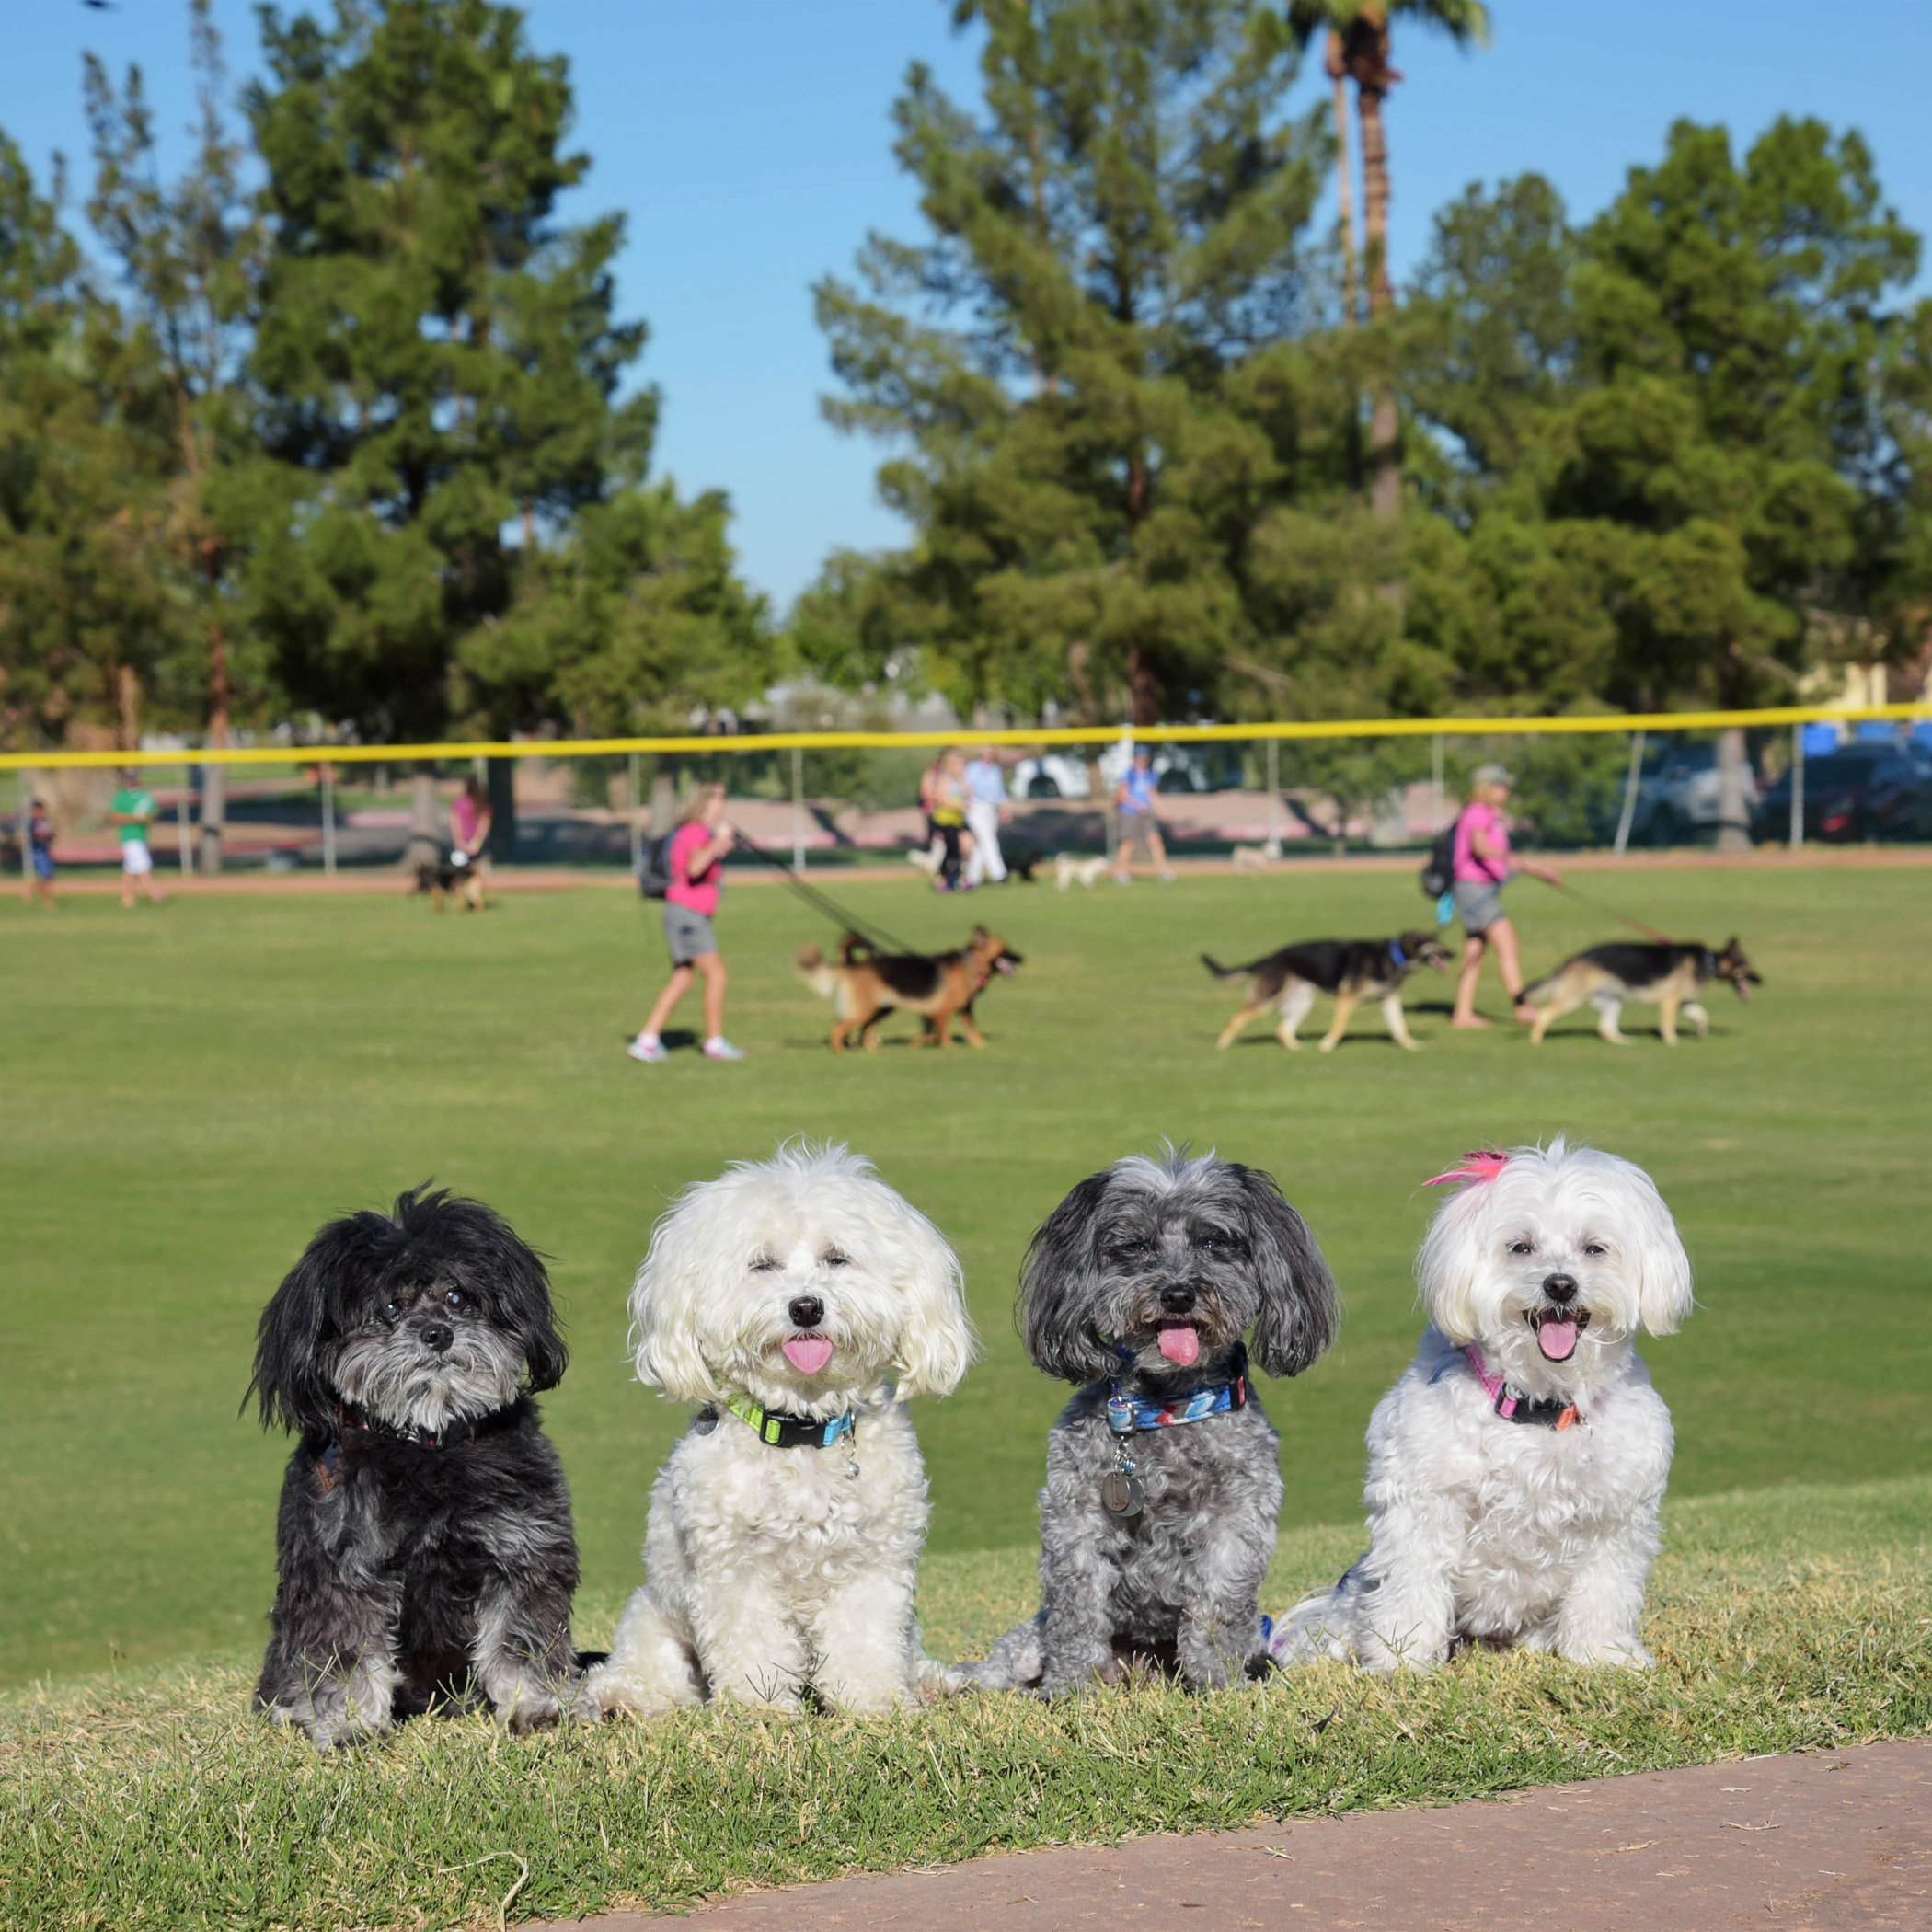  We made it to Freestone Park, the site of the very first Phoenix Strut Your Mutt Walk to benefit Best Friends Animal Society. There are doggies everywhere!! We can’t wait to strut our stuff on the catwalk! Wait, this is a dog walk, not a cat walk!! 